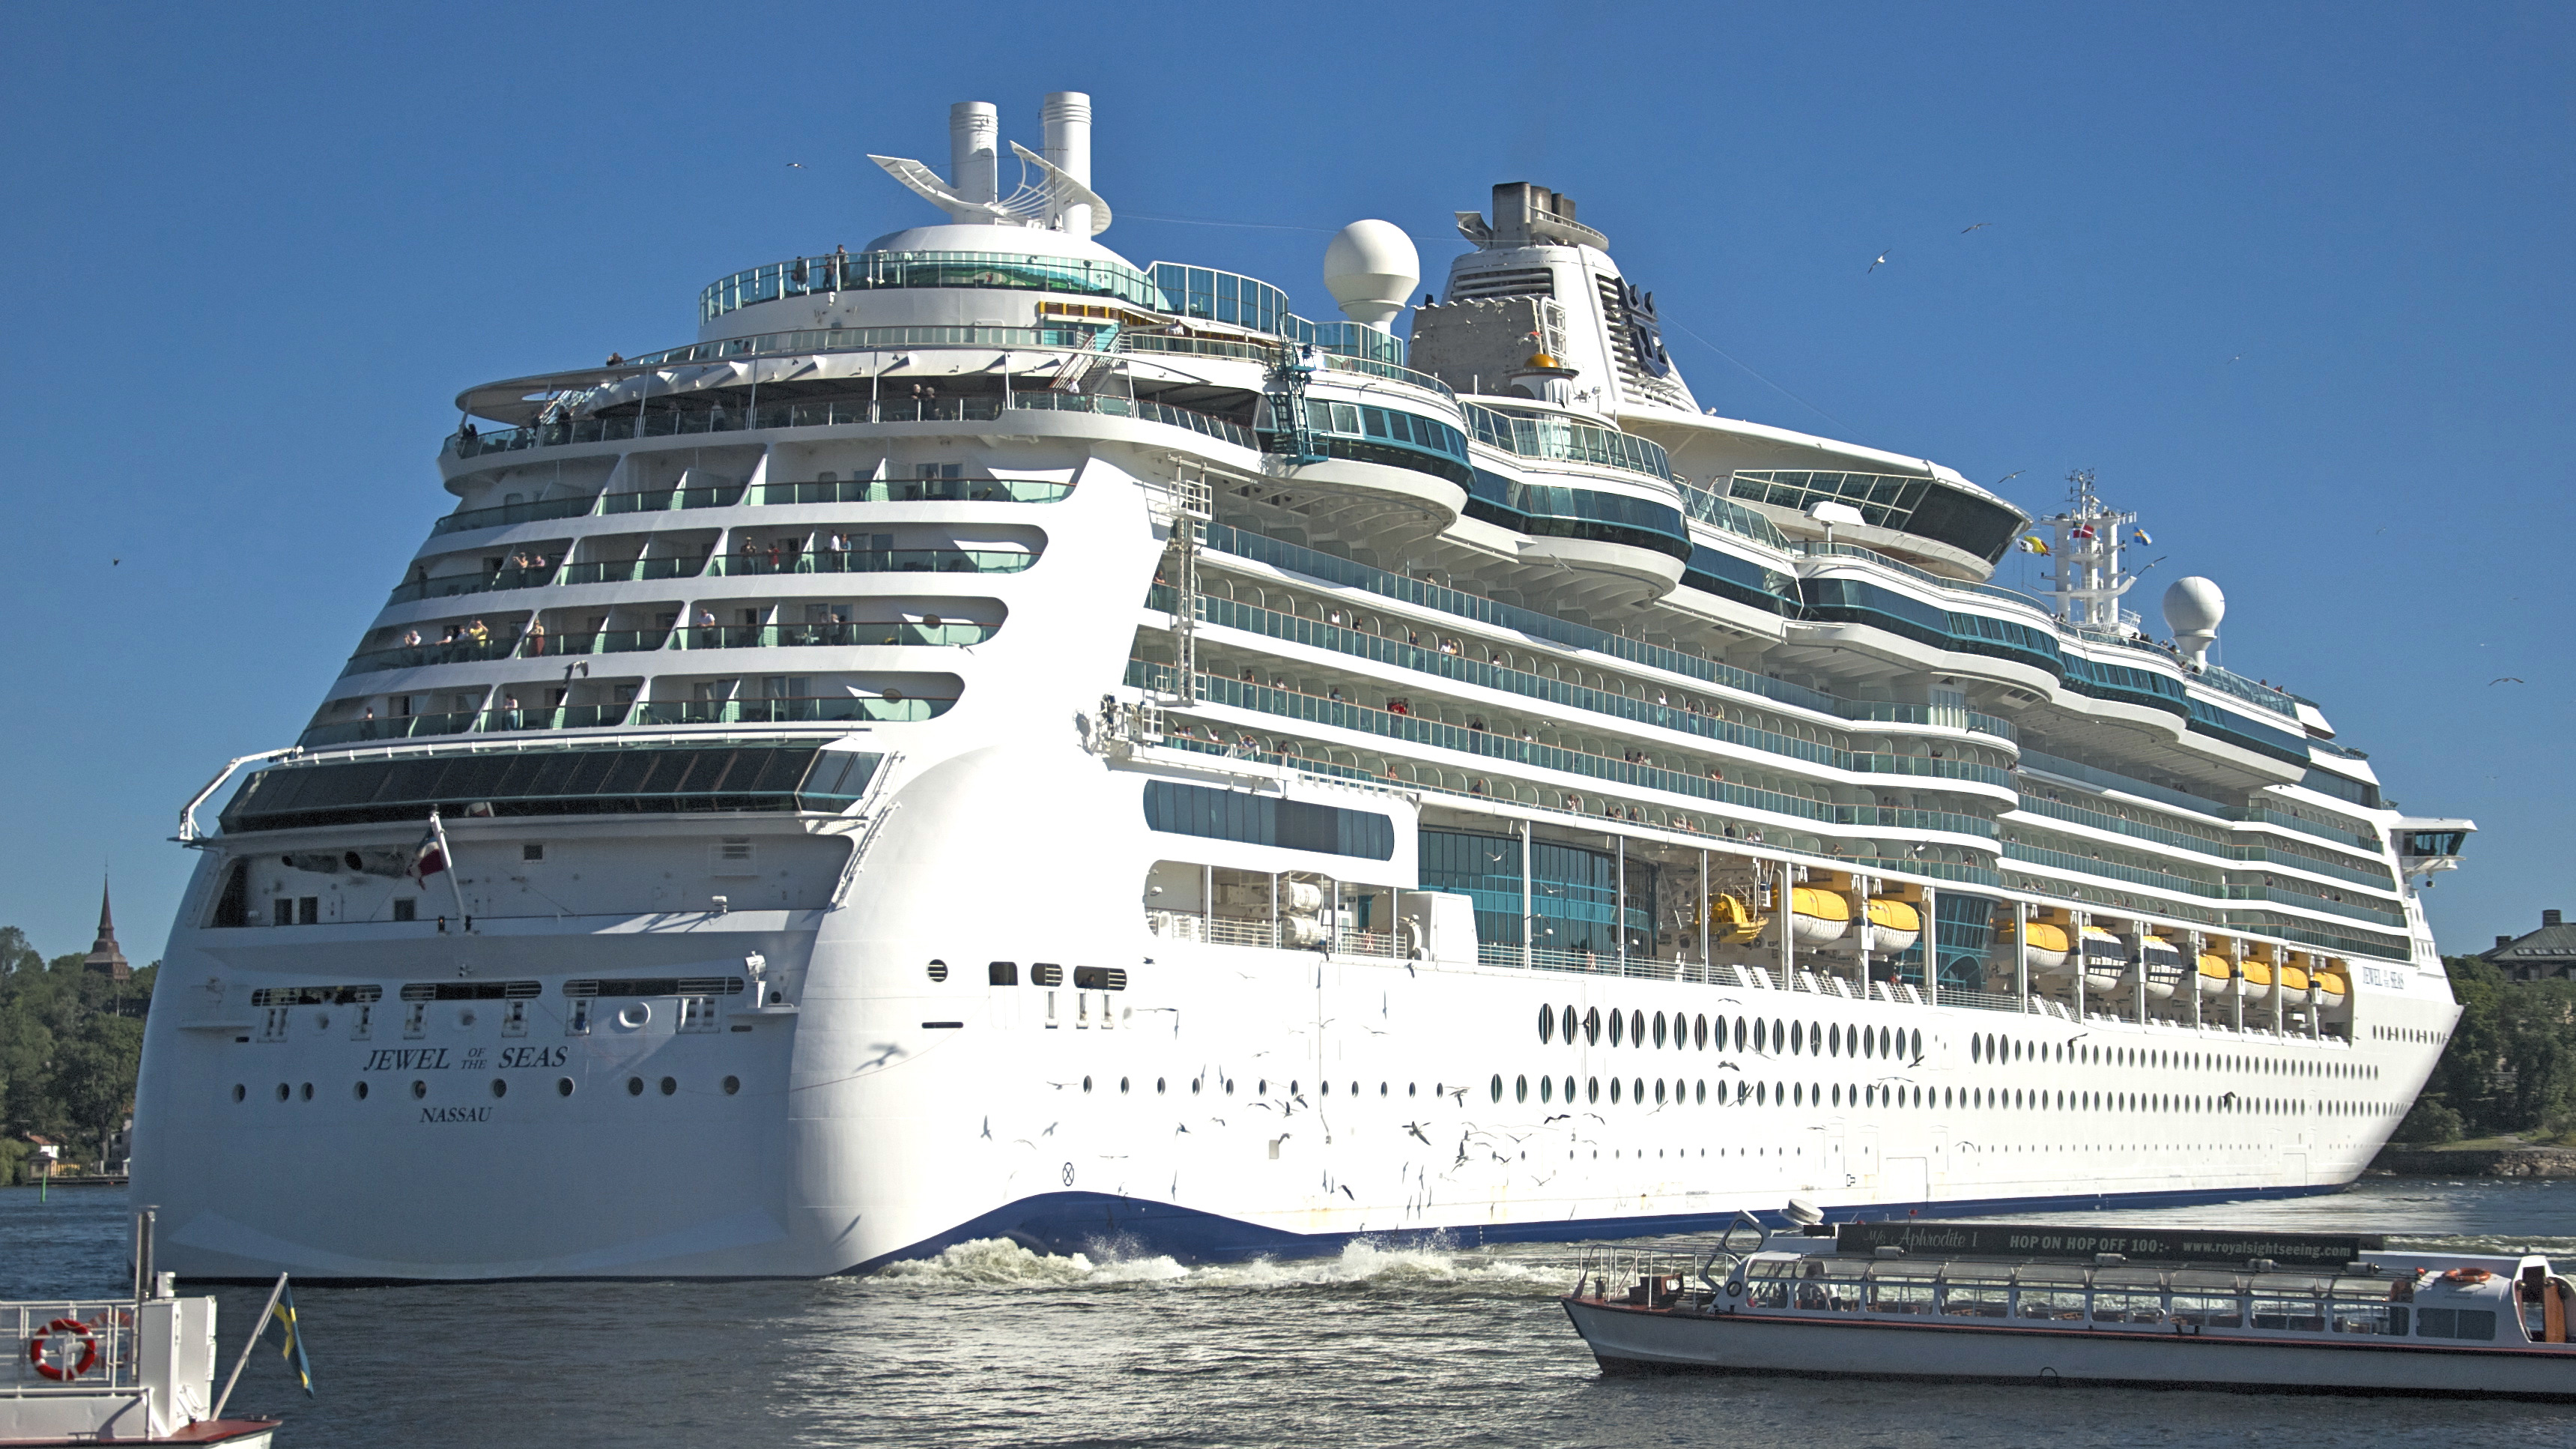 Jewel of the Seas in Stockholm June 2011b (cropped)